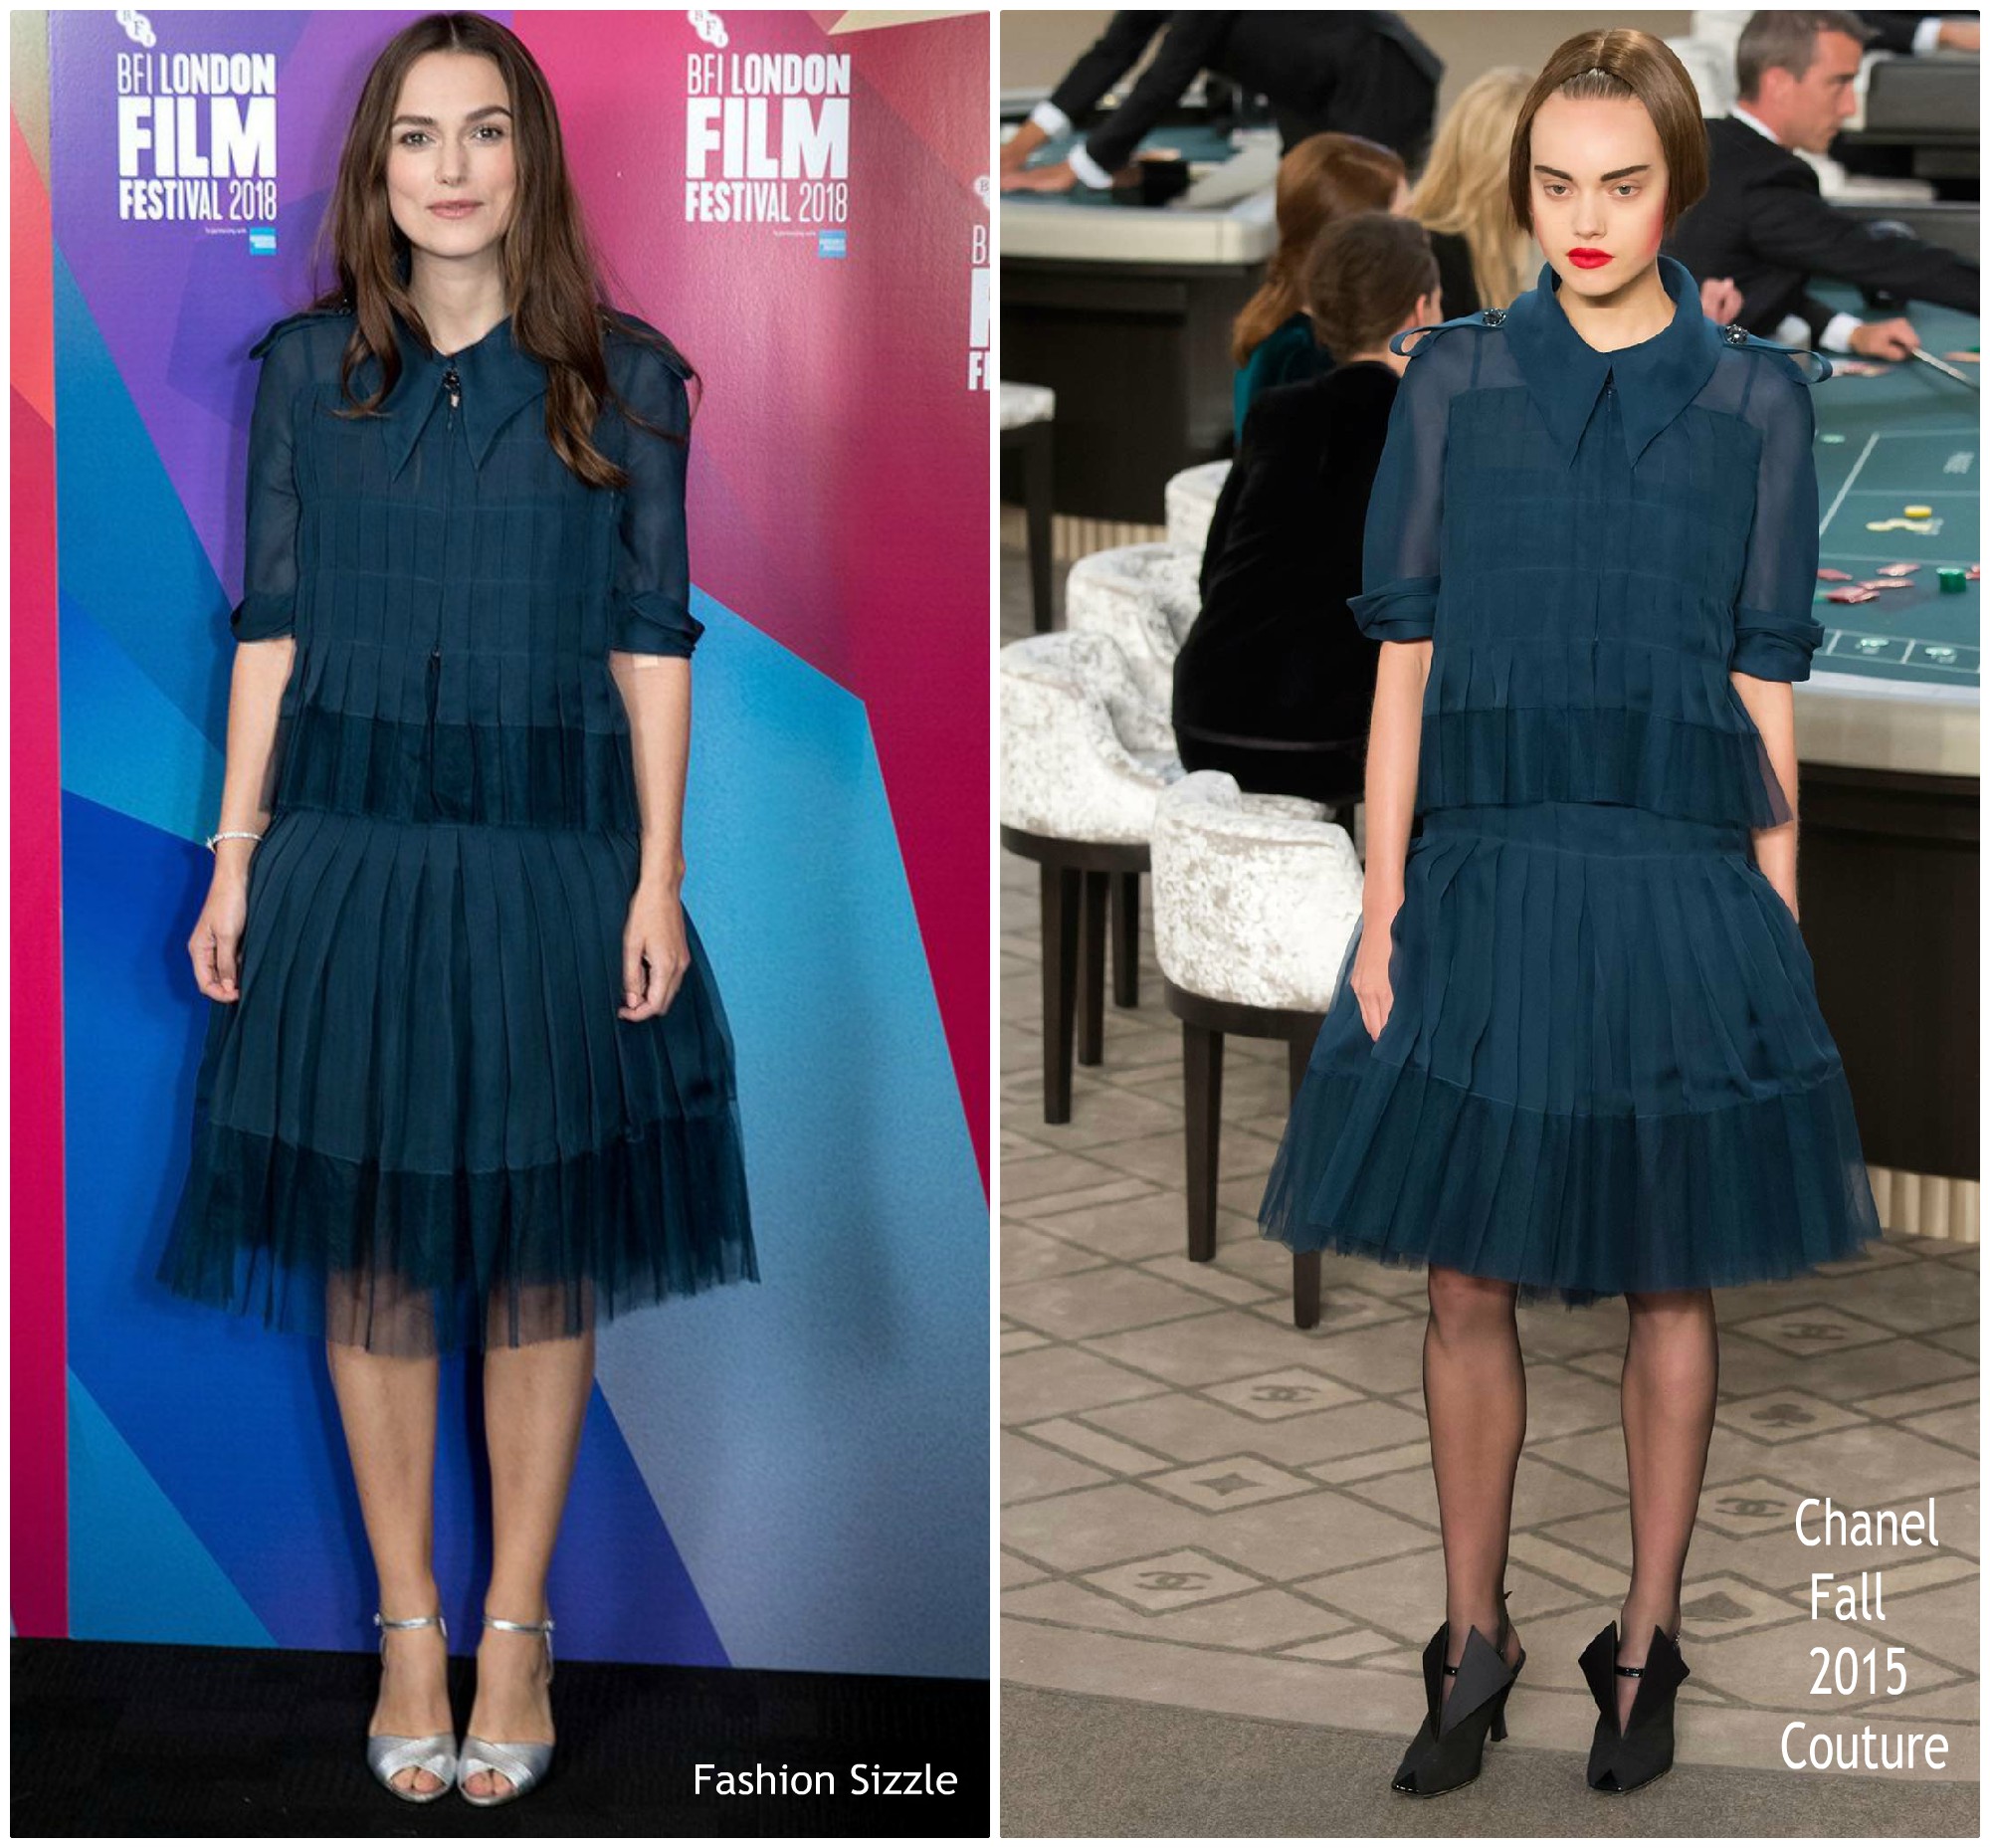 Keira Knightley in Chanel  Couture @ ‘Screen Talks’ at the 62nd BFI London Film Festival